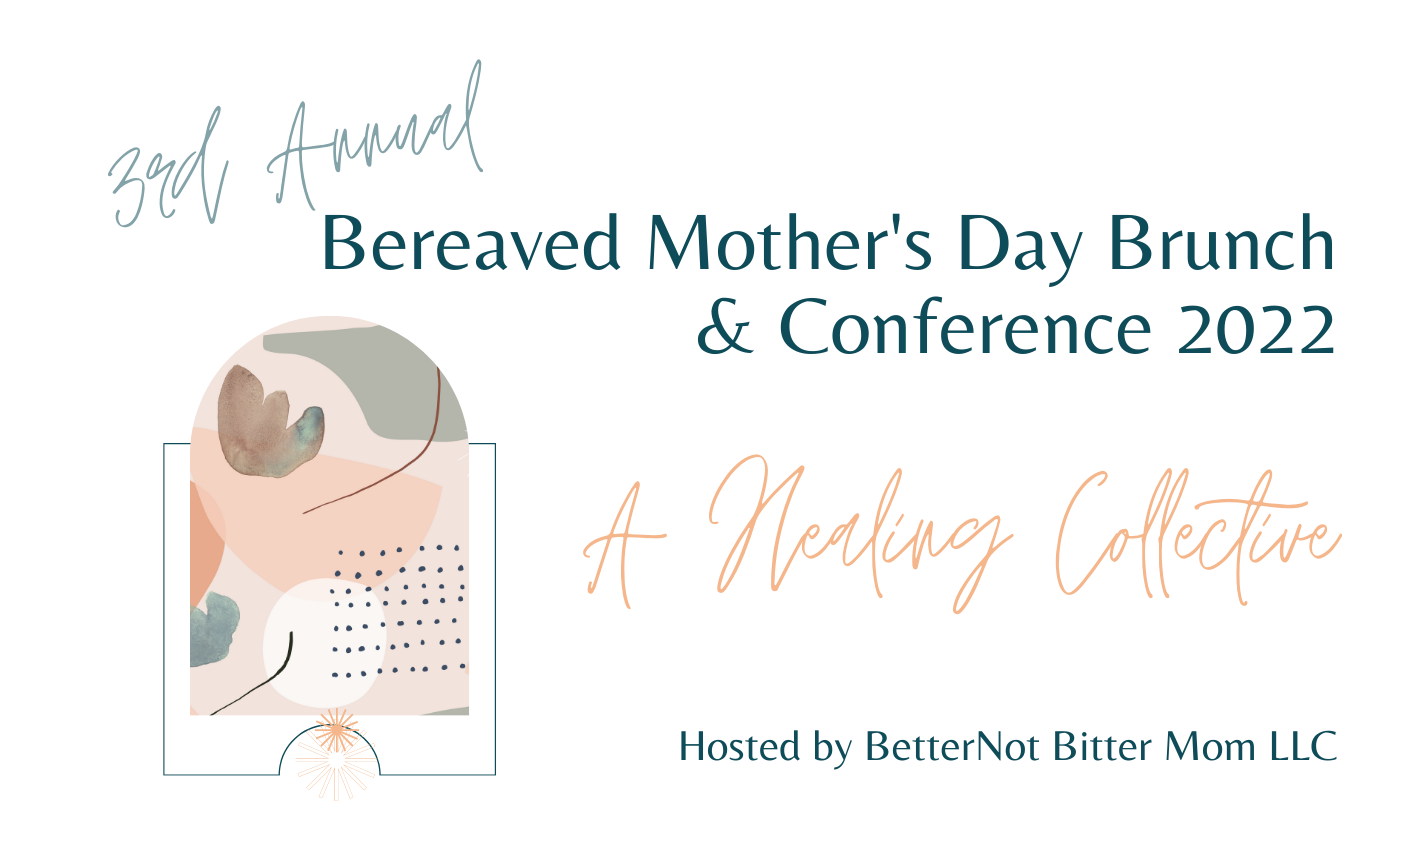 Annual Bereaved Mother's Day Conference-A Healing Collective